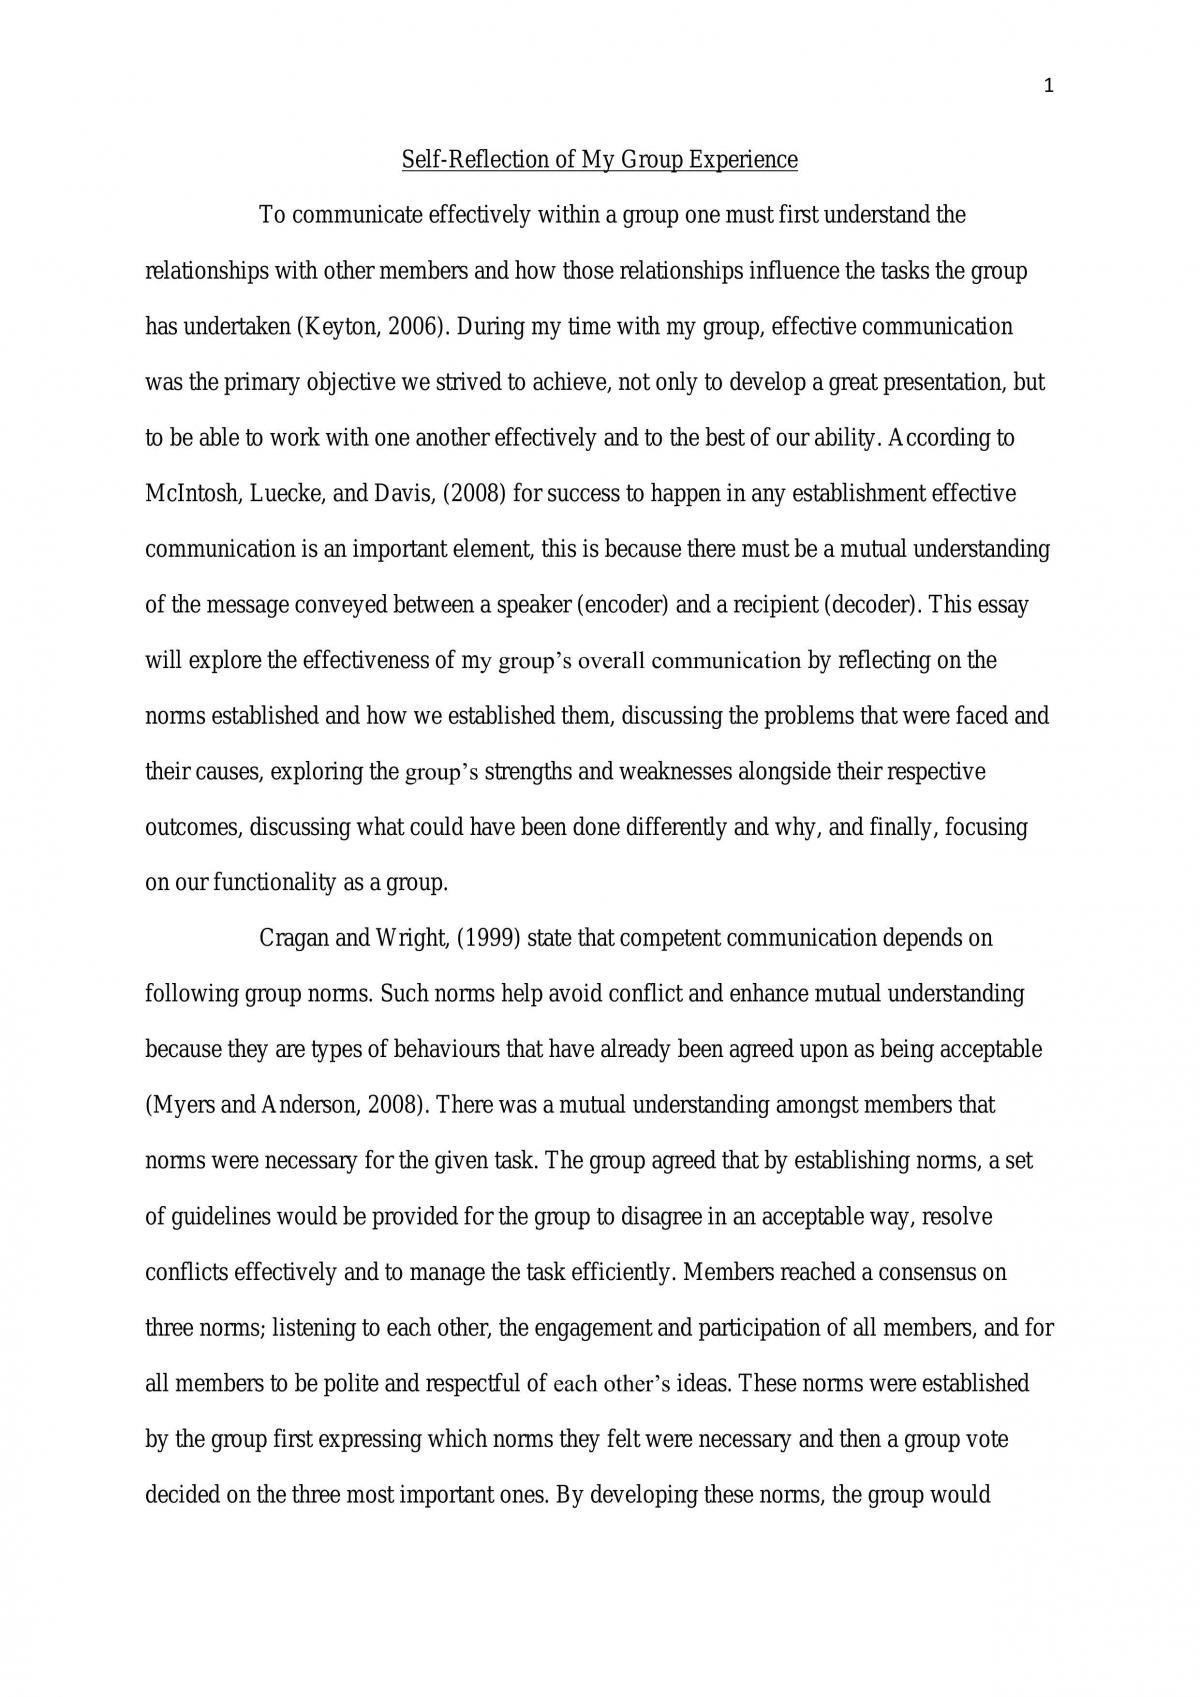 COMU1030 Effective Group Communication Essay - Page 1